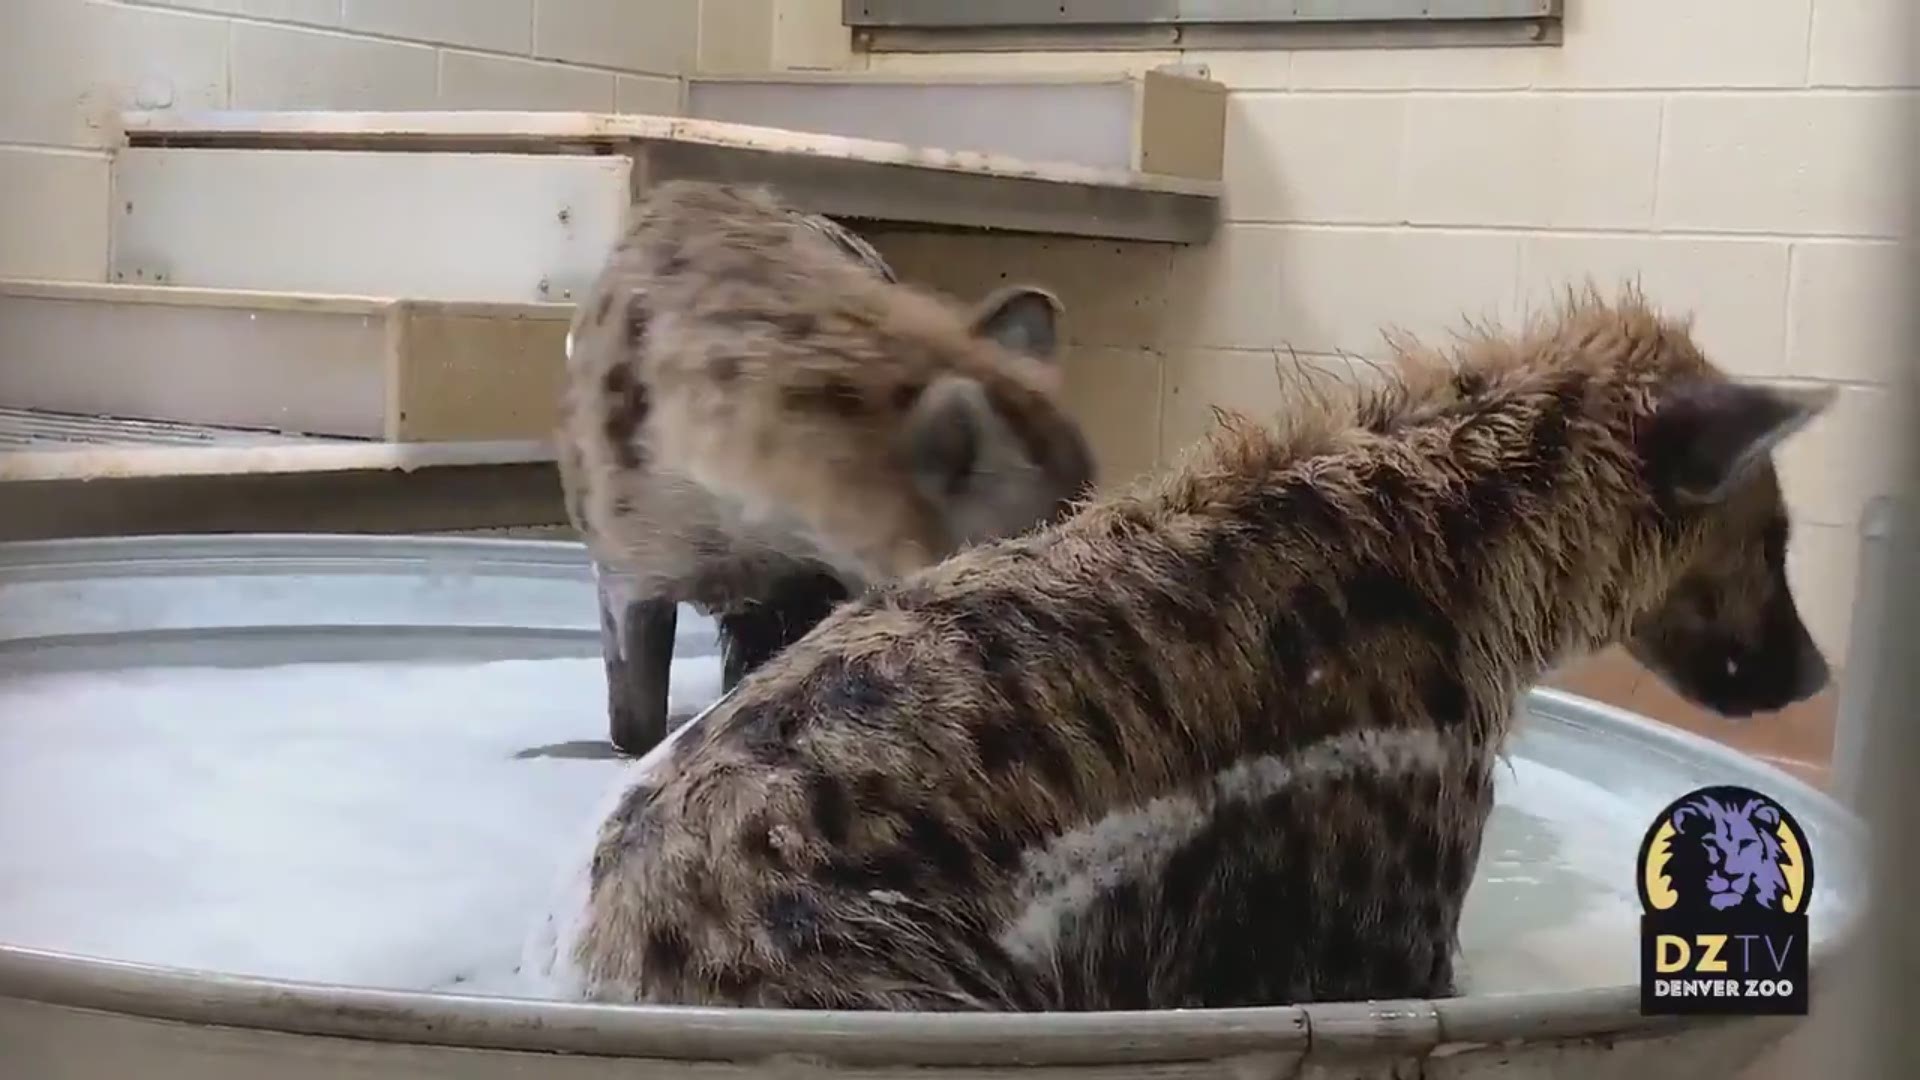 Denver Zoo shared a video of some well-pampered hyenas enjoying a bubble bath on Thursday.